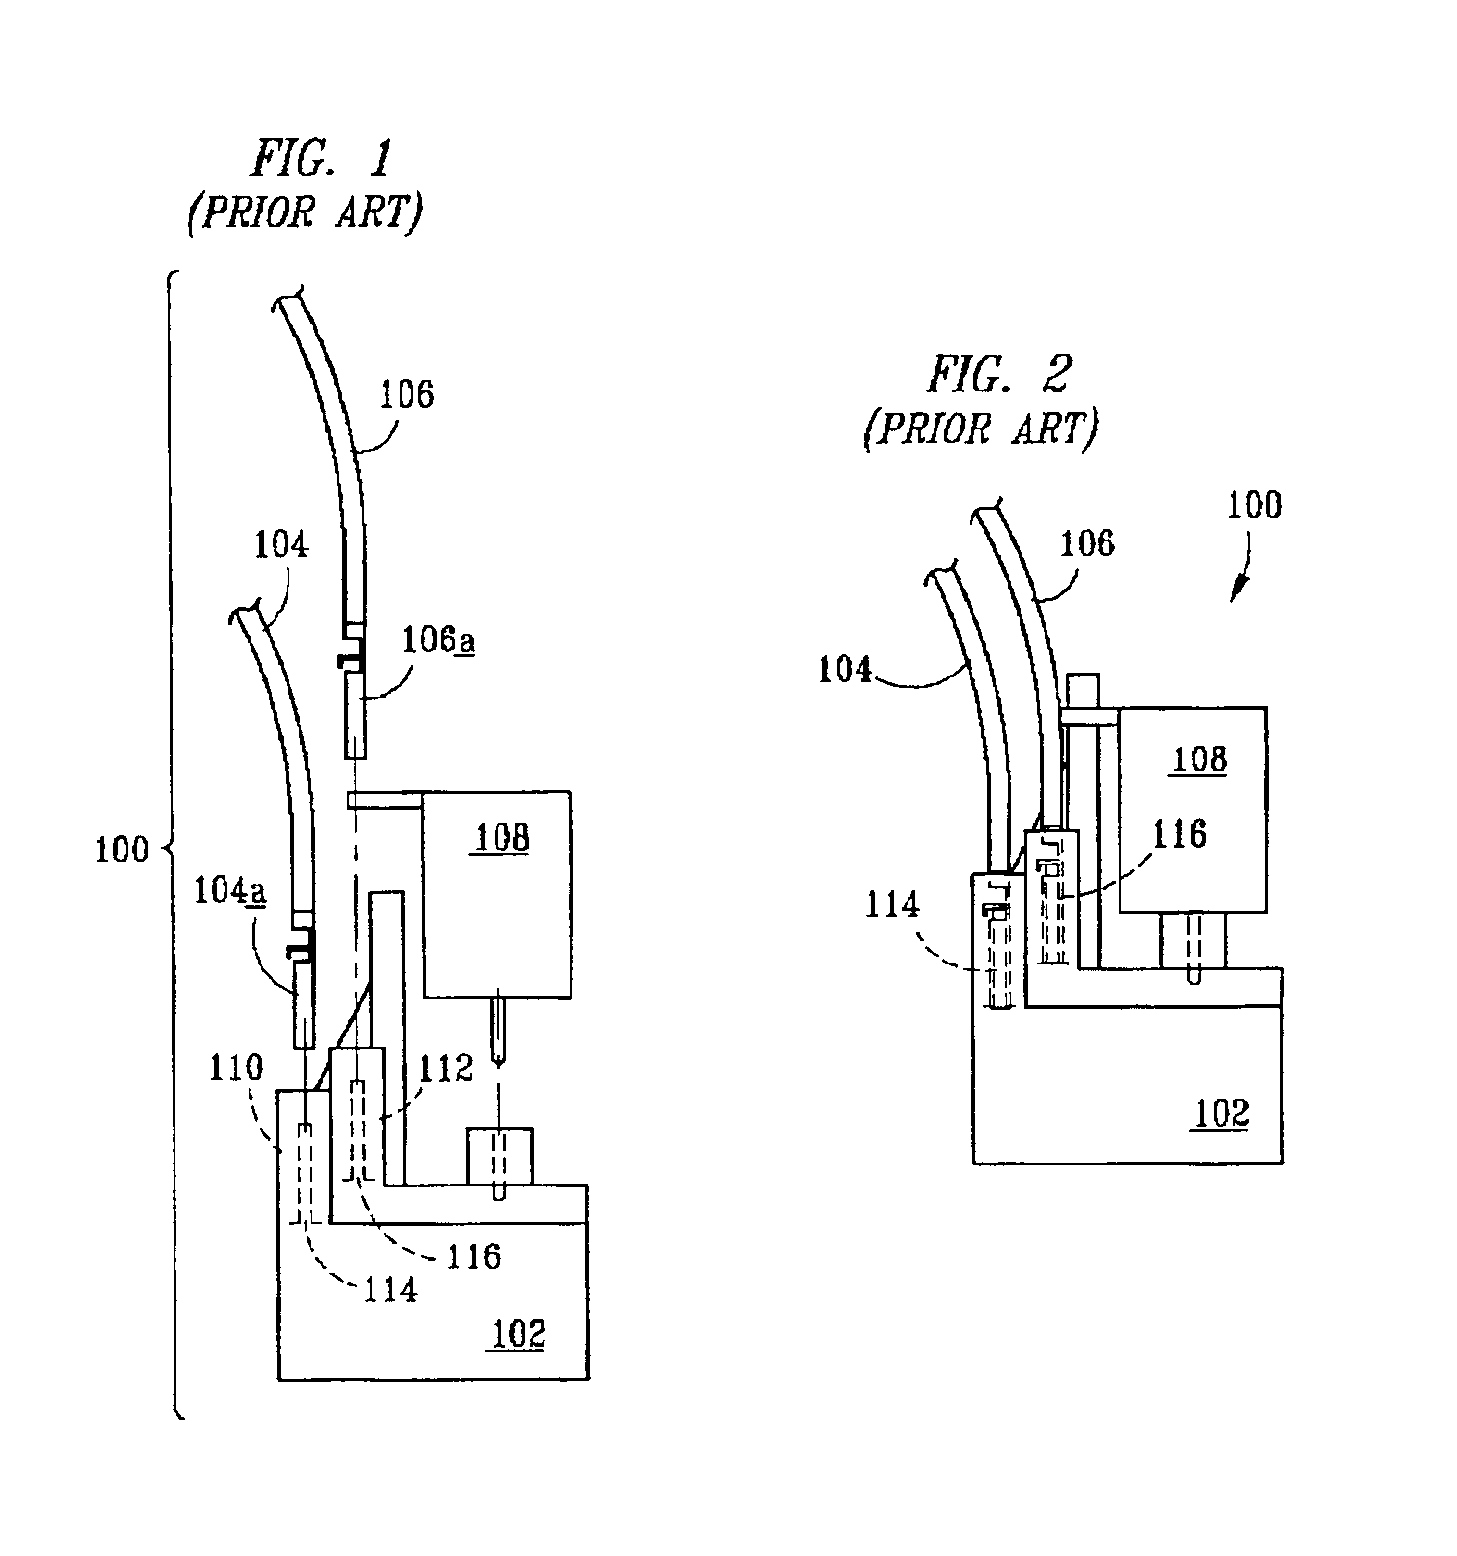 Quick-connect positive temperature coefficient of resistance resistor/overload assembly and method